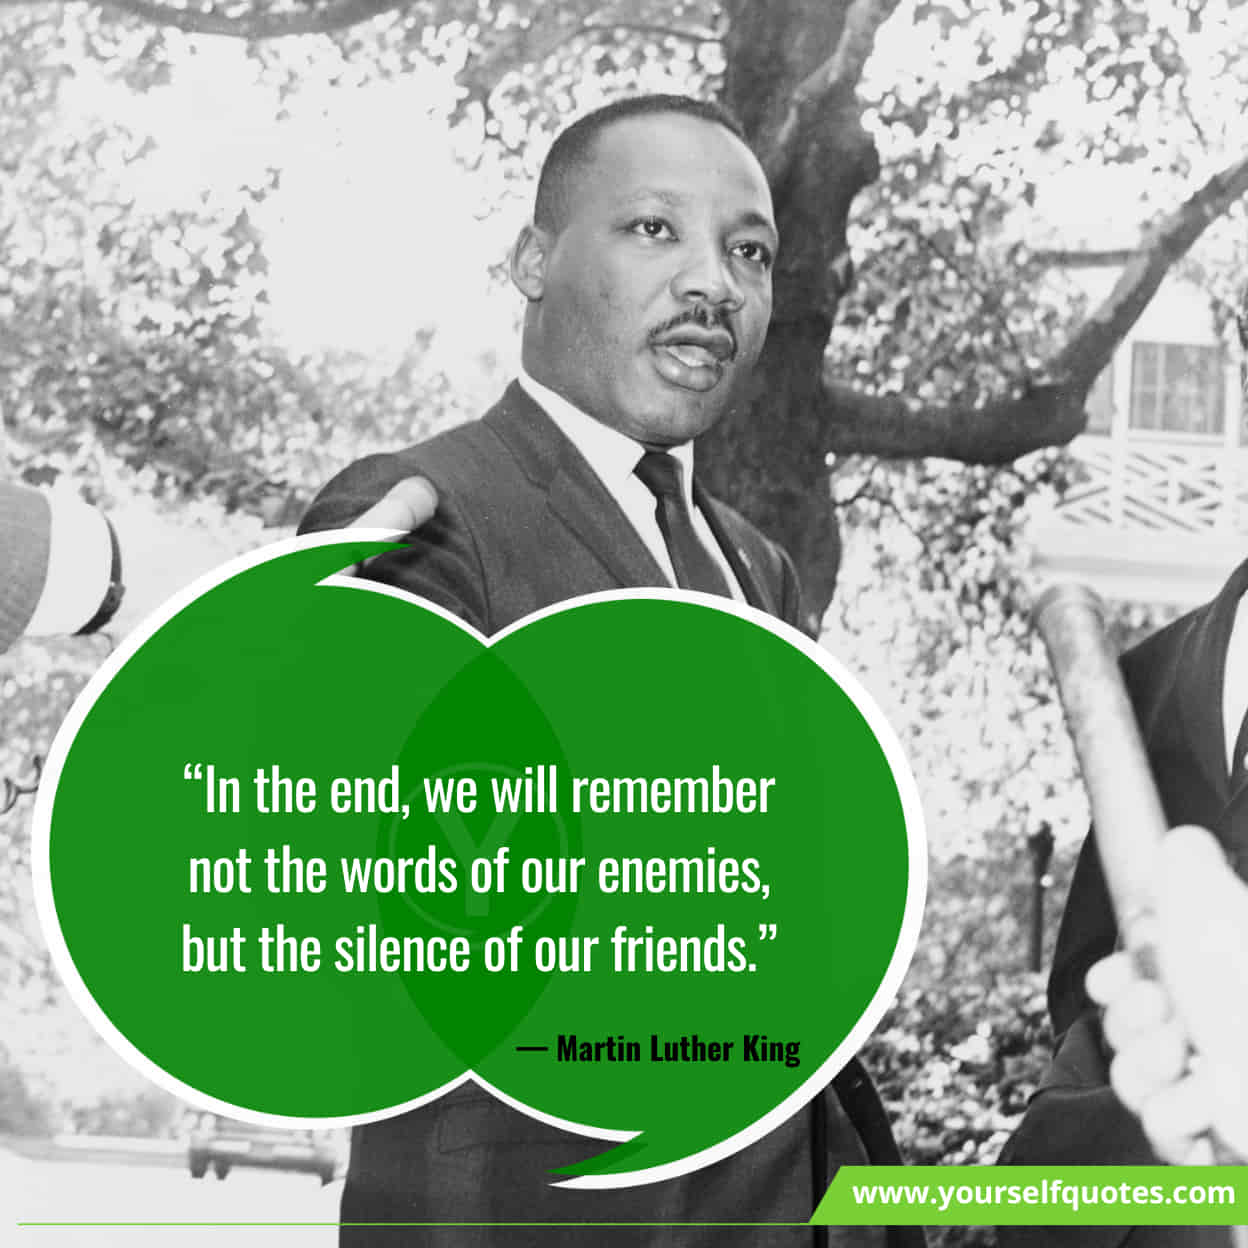 Martin Luther King, Jr. Inspiring Quotes